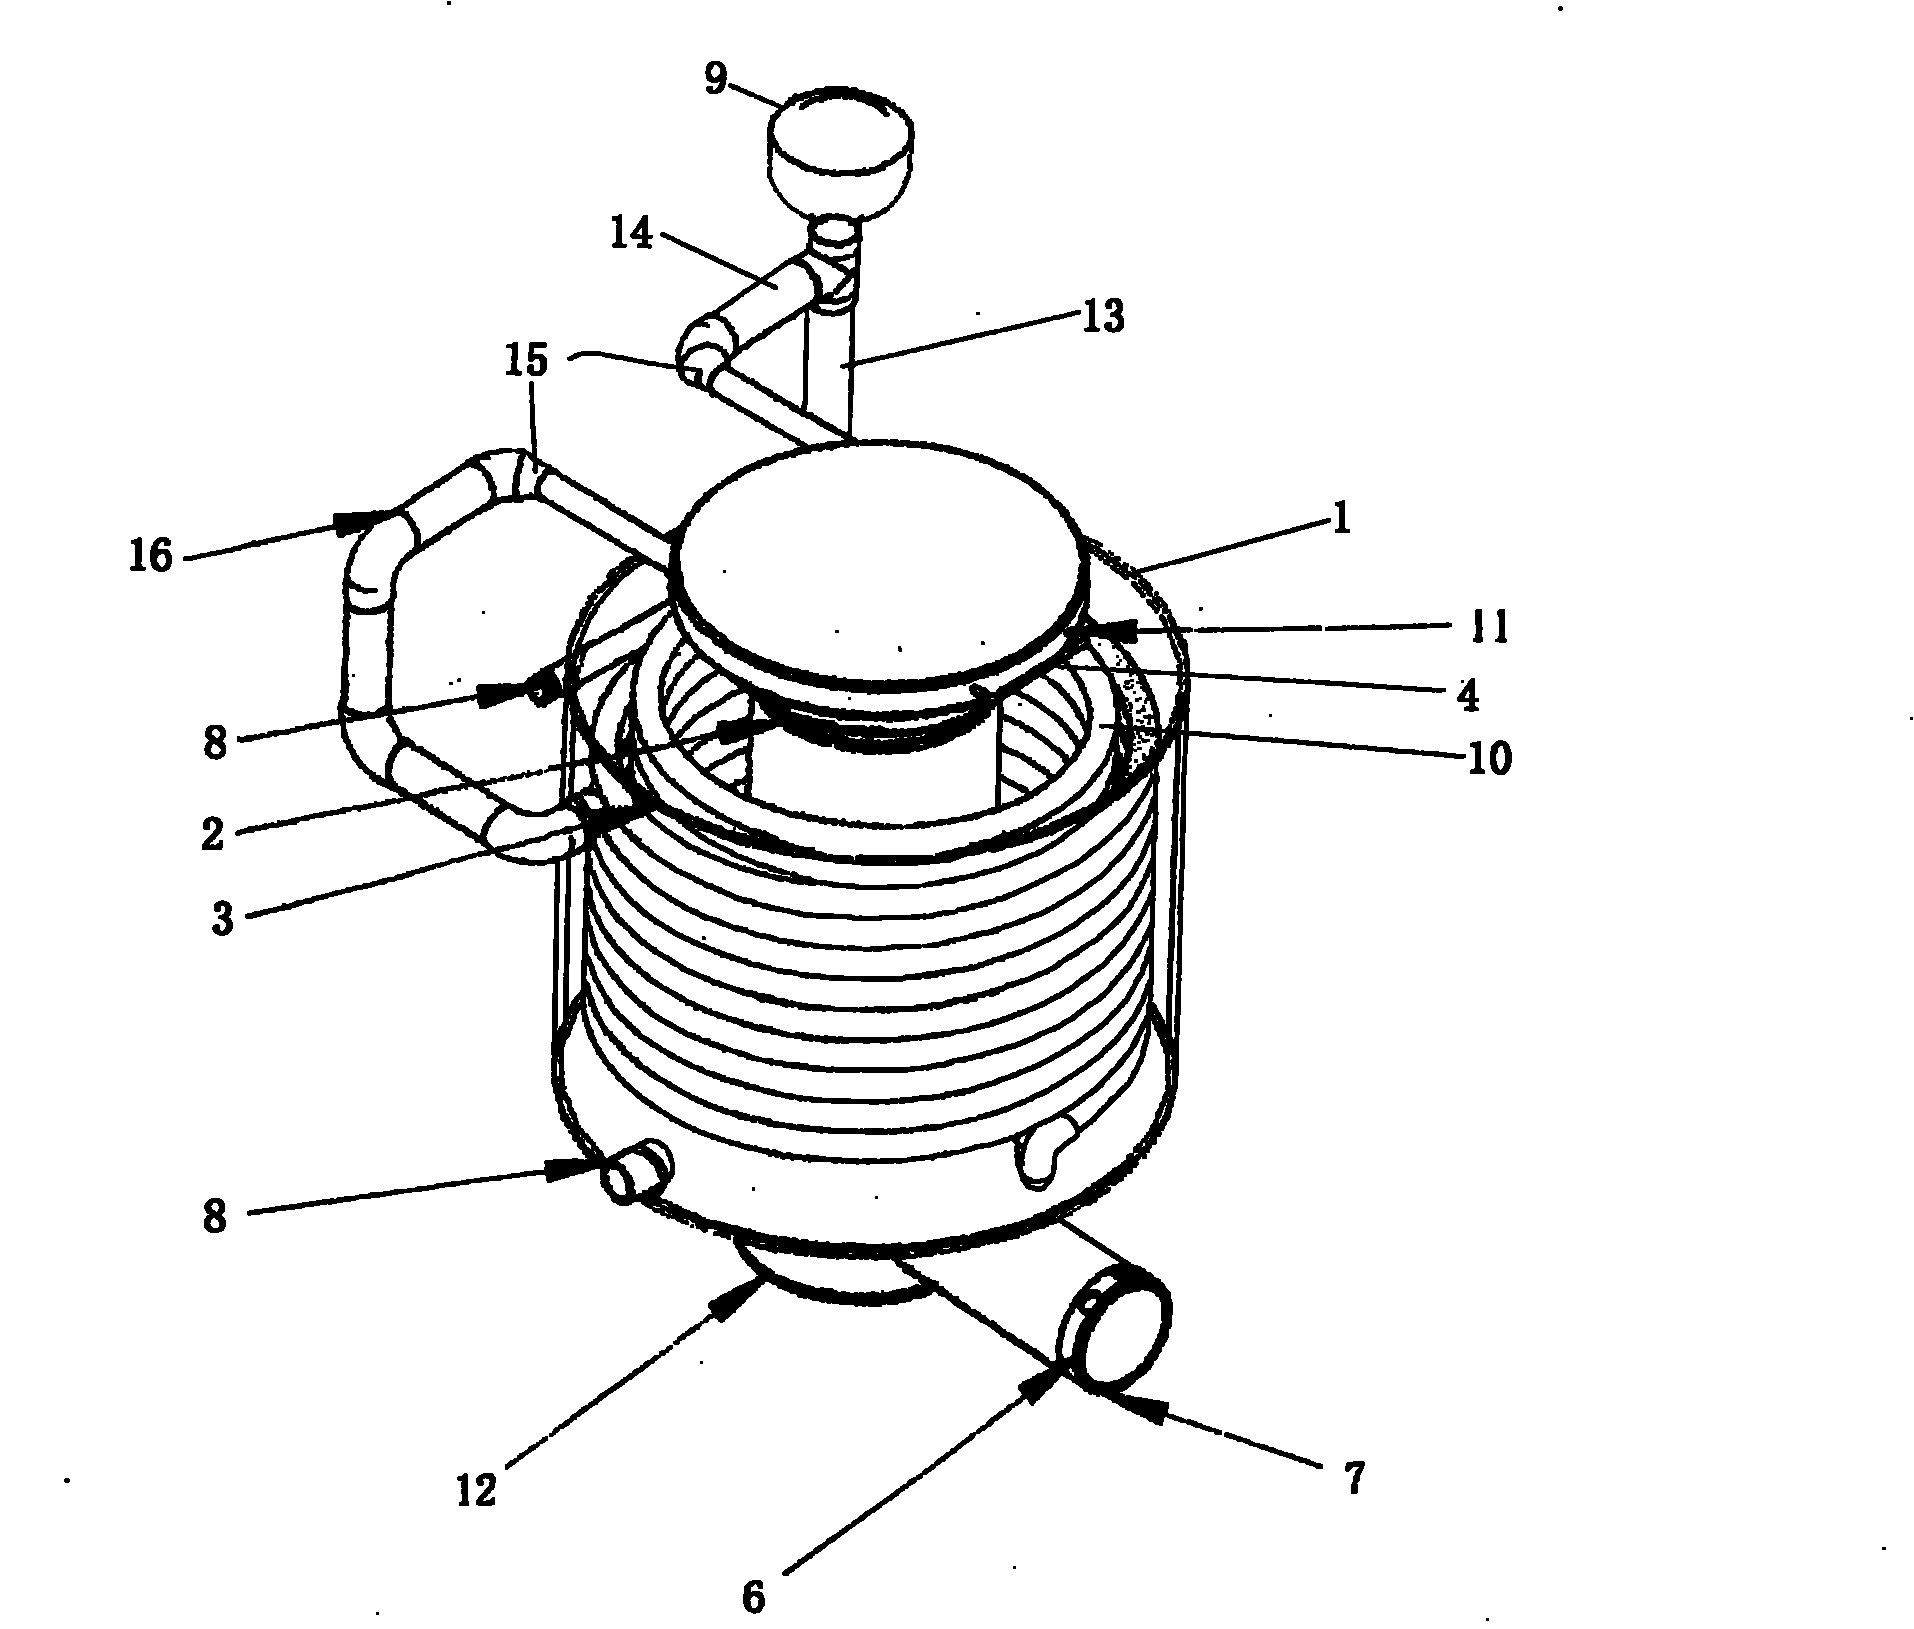 Safety stove